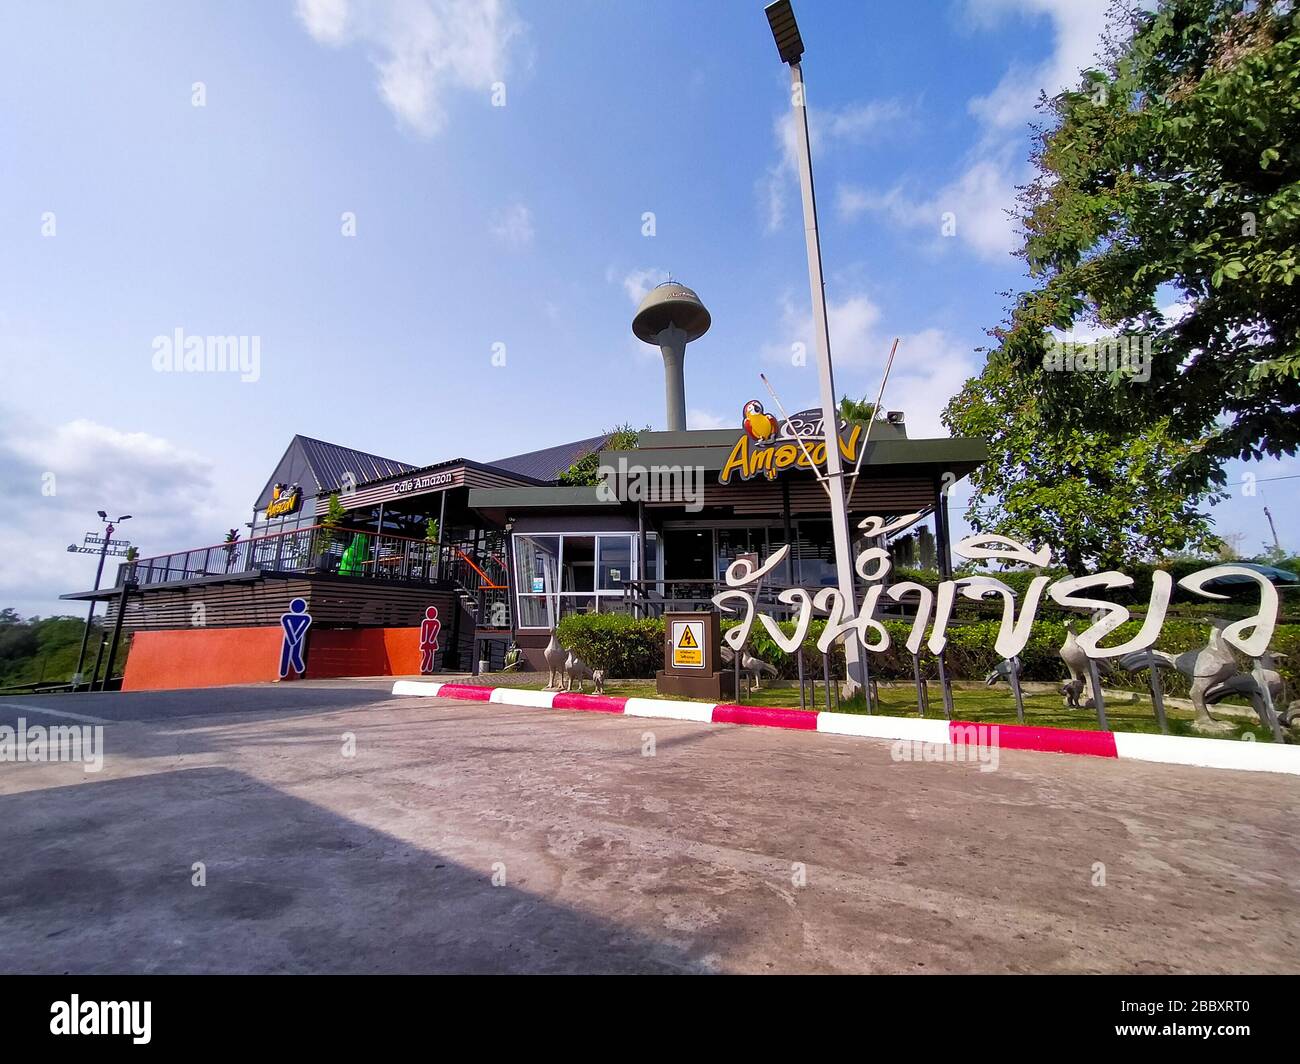 Street cafa© High Resolution Stock Photography and Images - Alamy